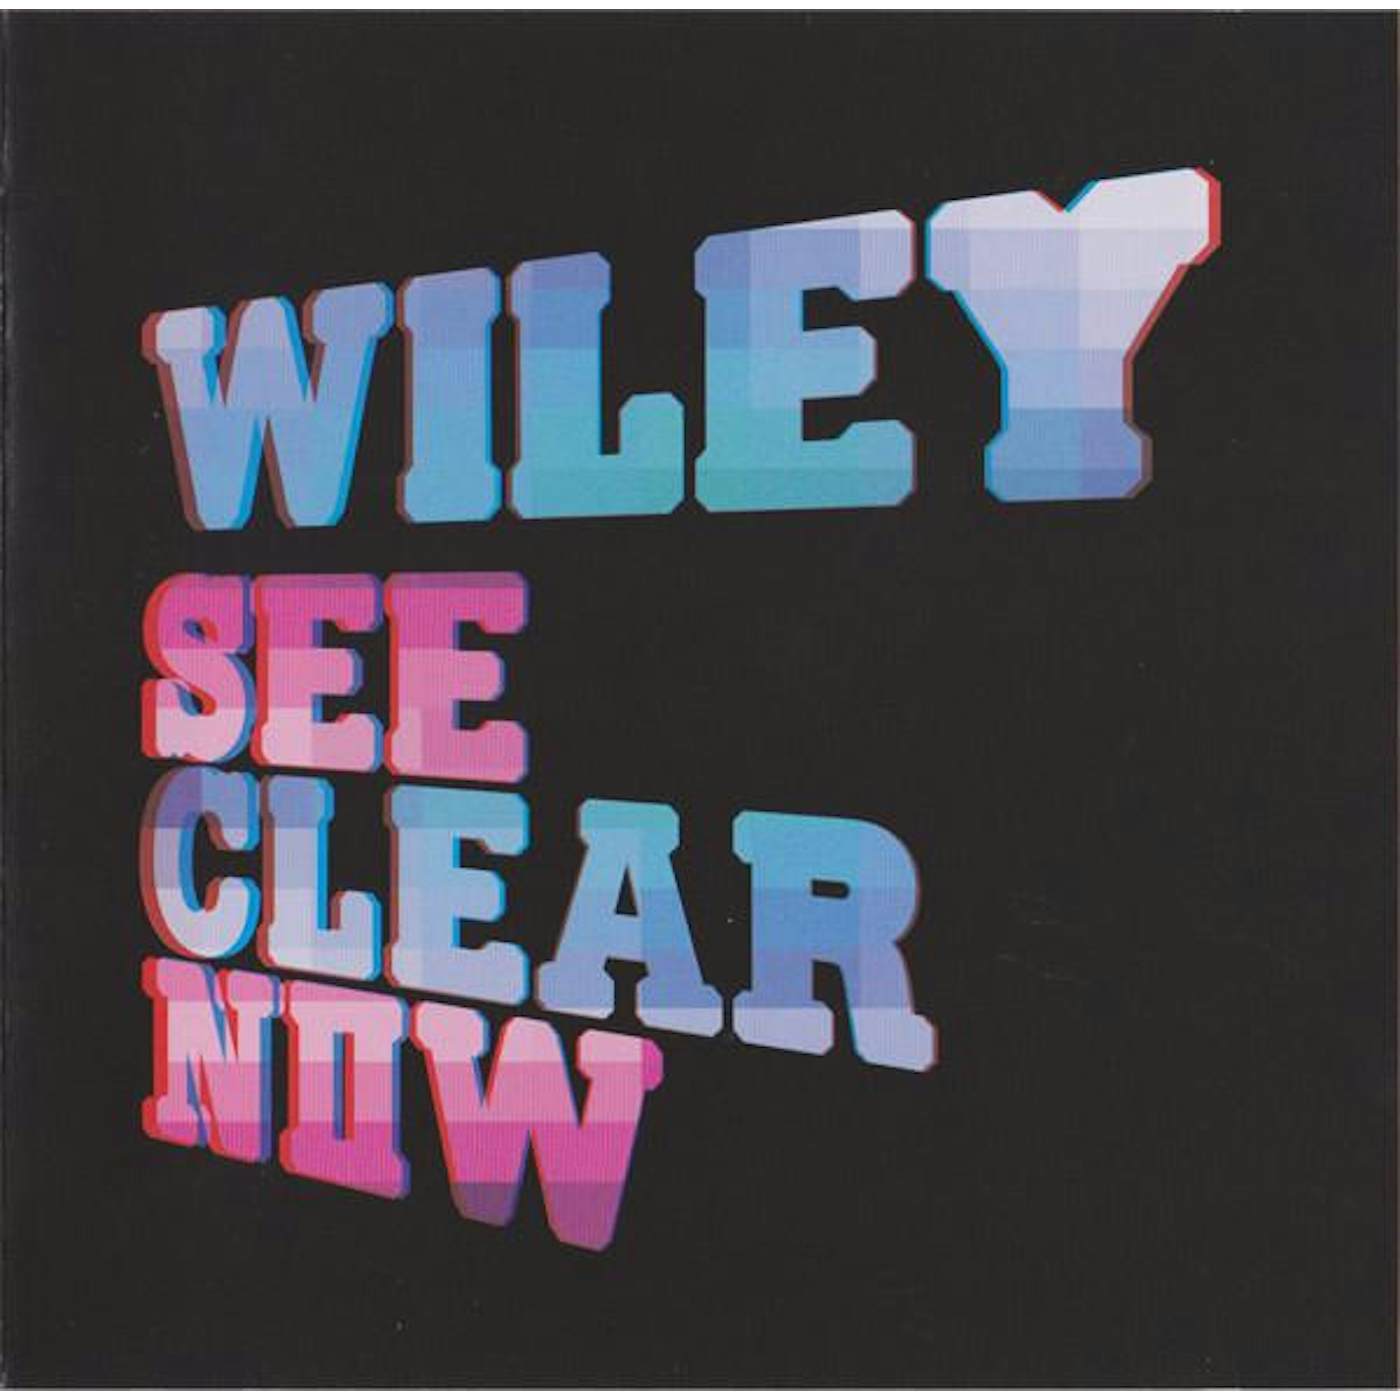 Wiley SEE CLEAR NOW CD